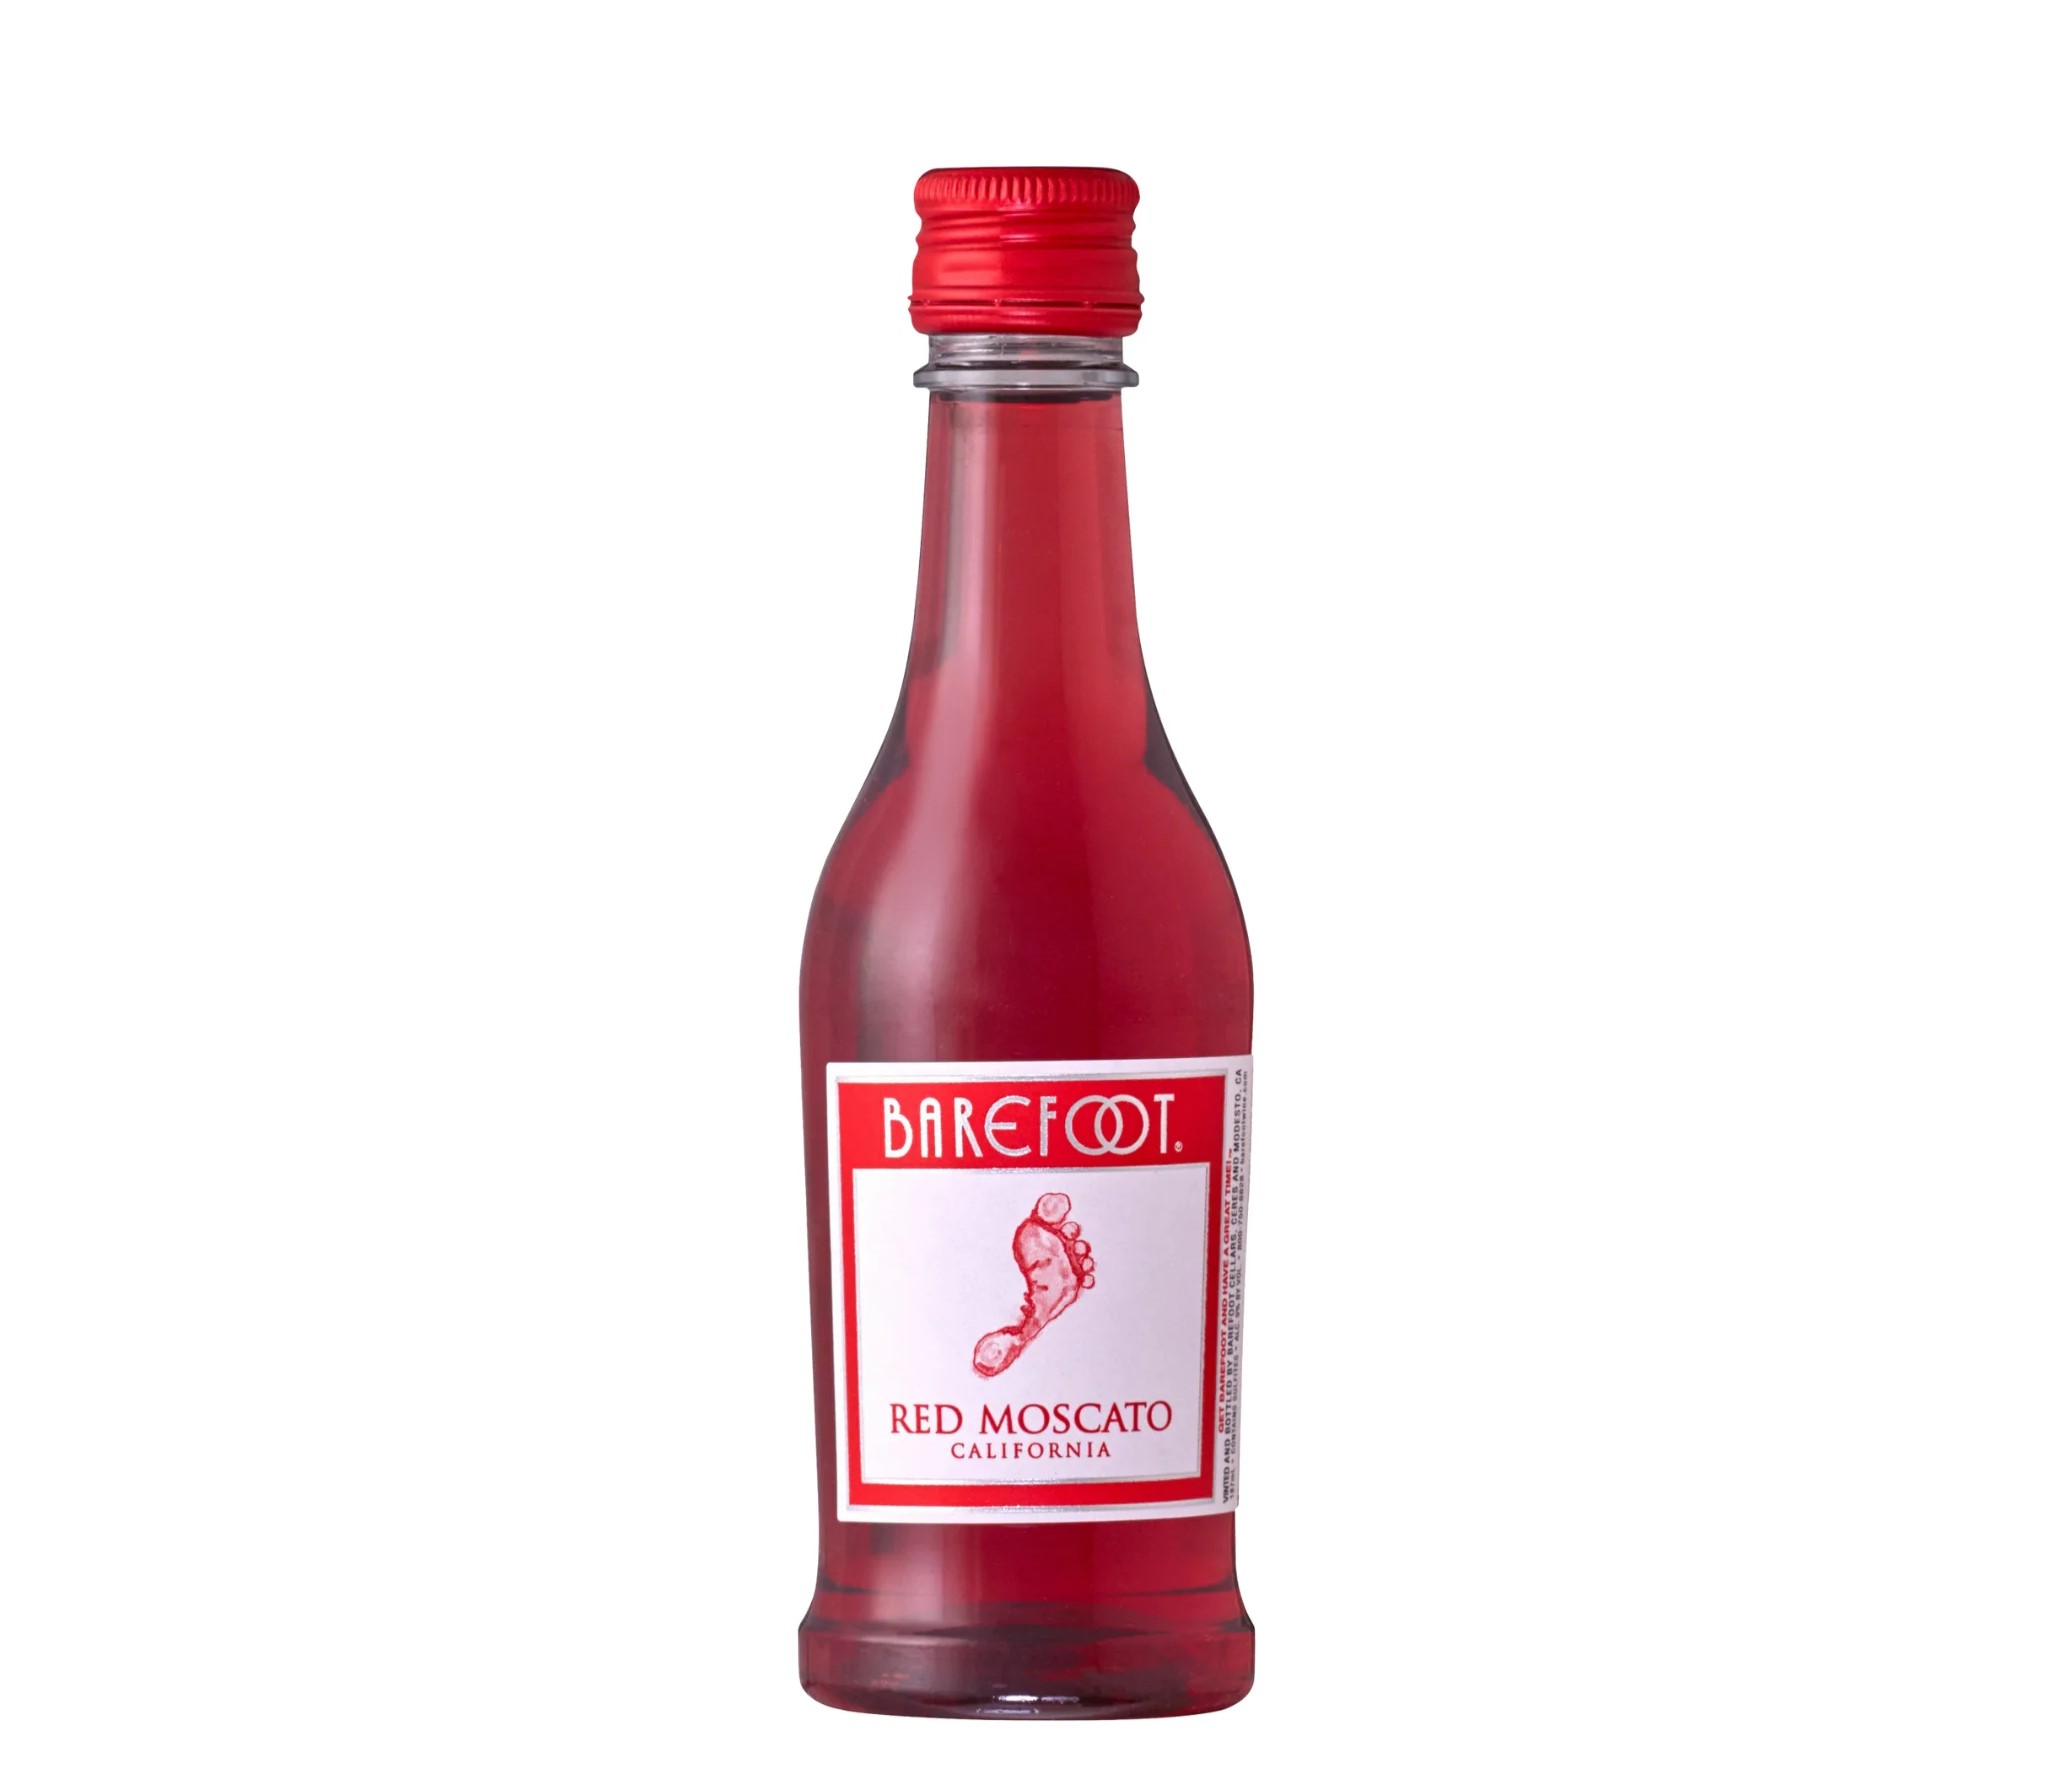 11 Barefoot Red Moscato Nutrition Facts - Facts.net